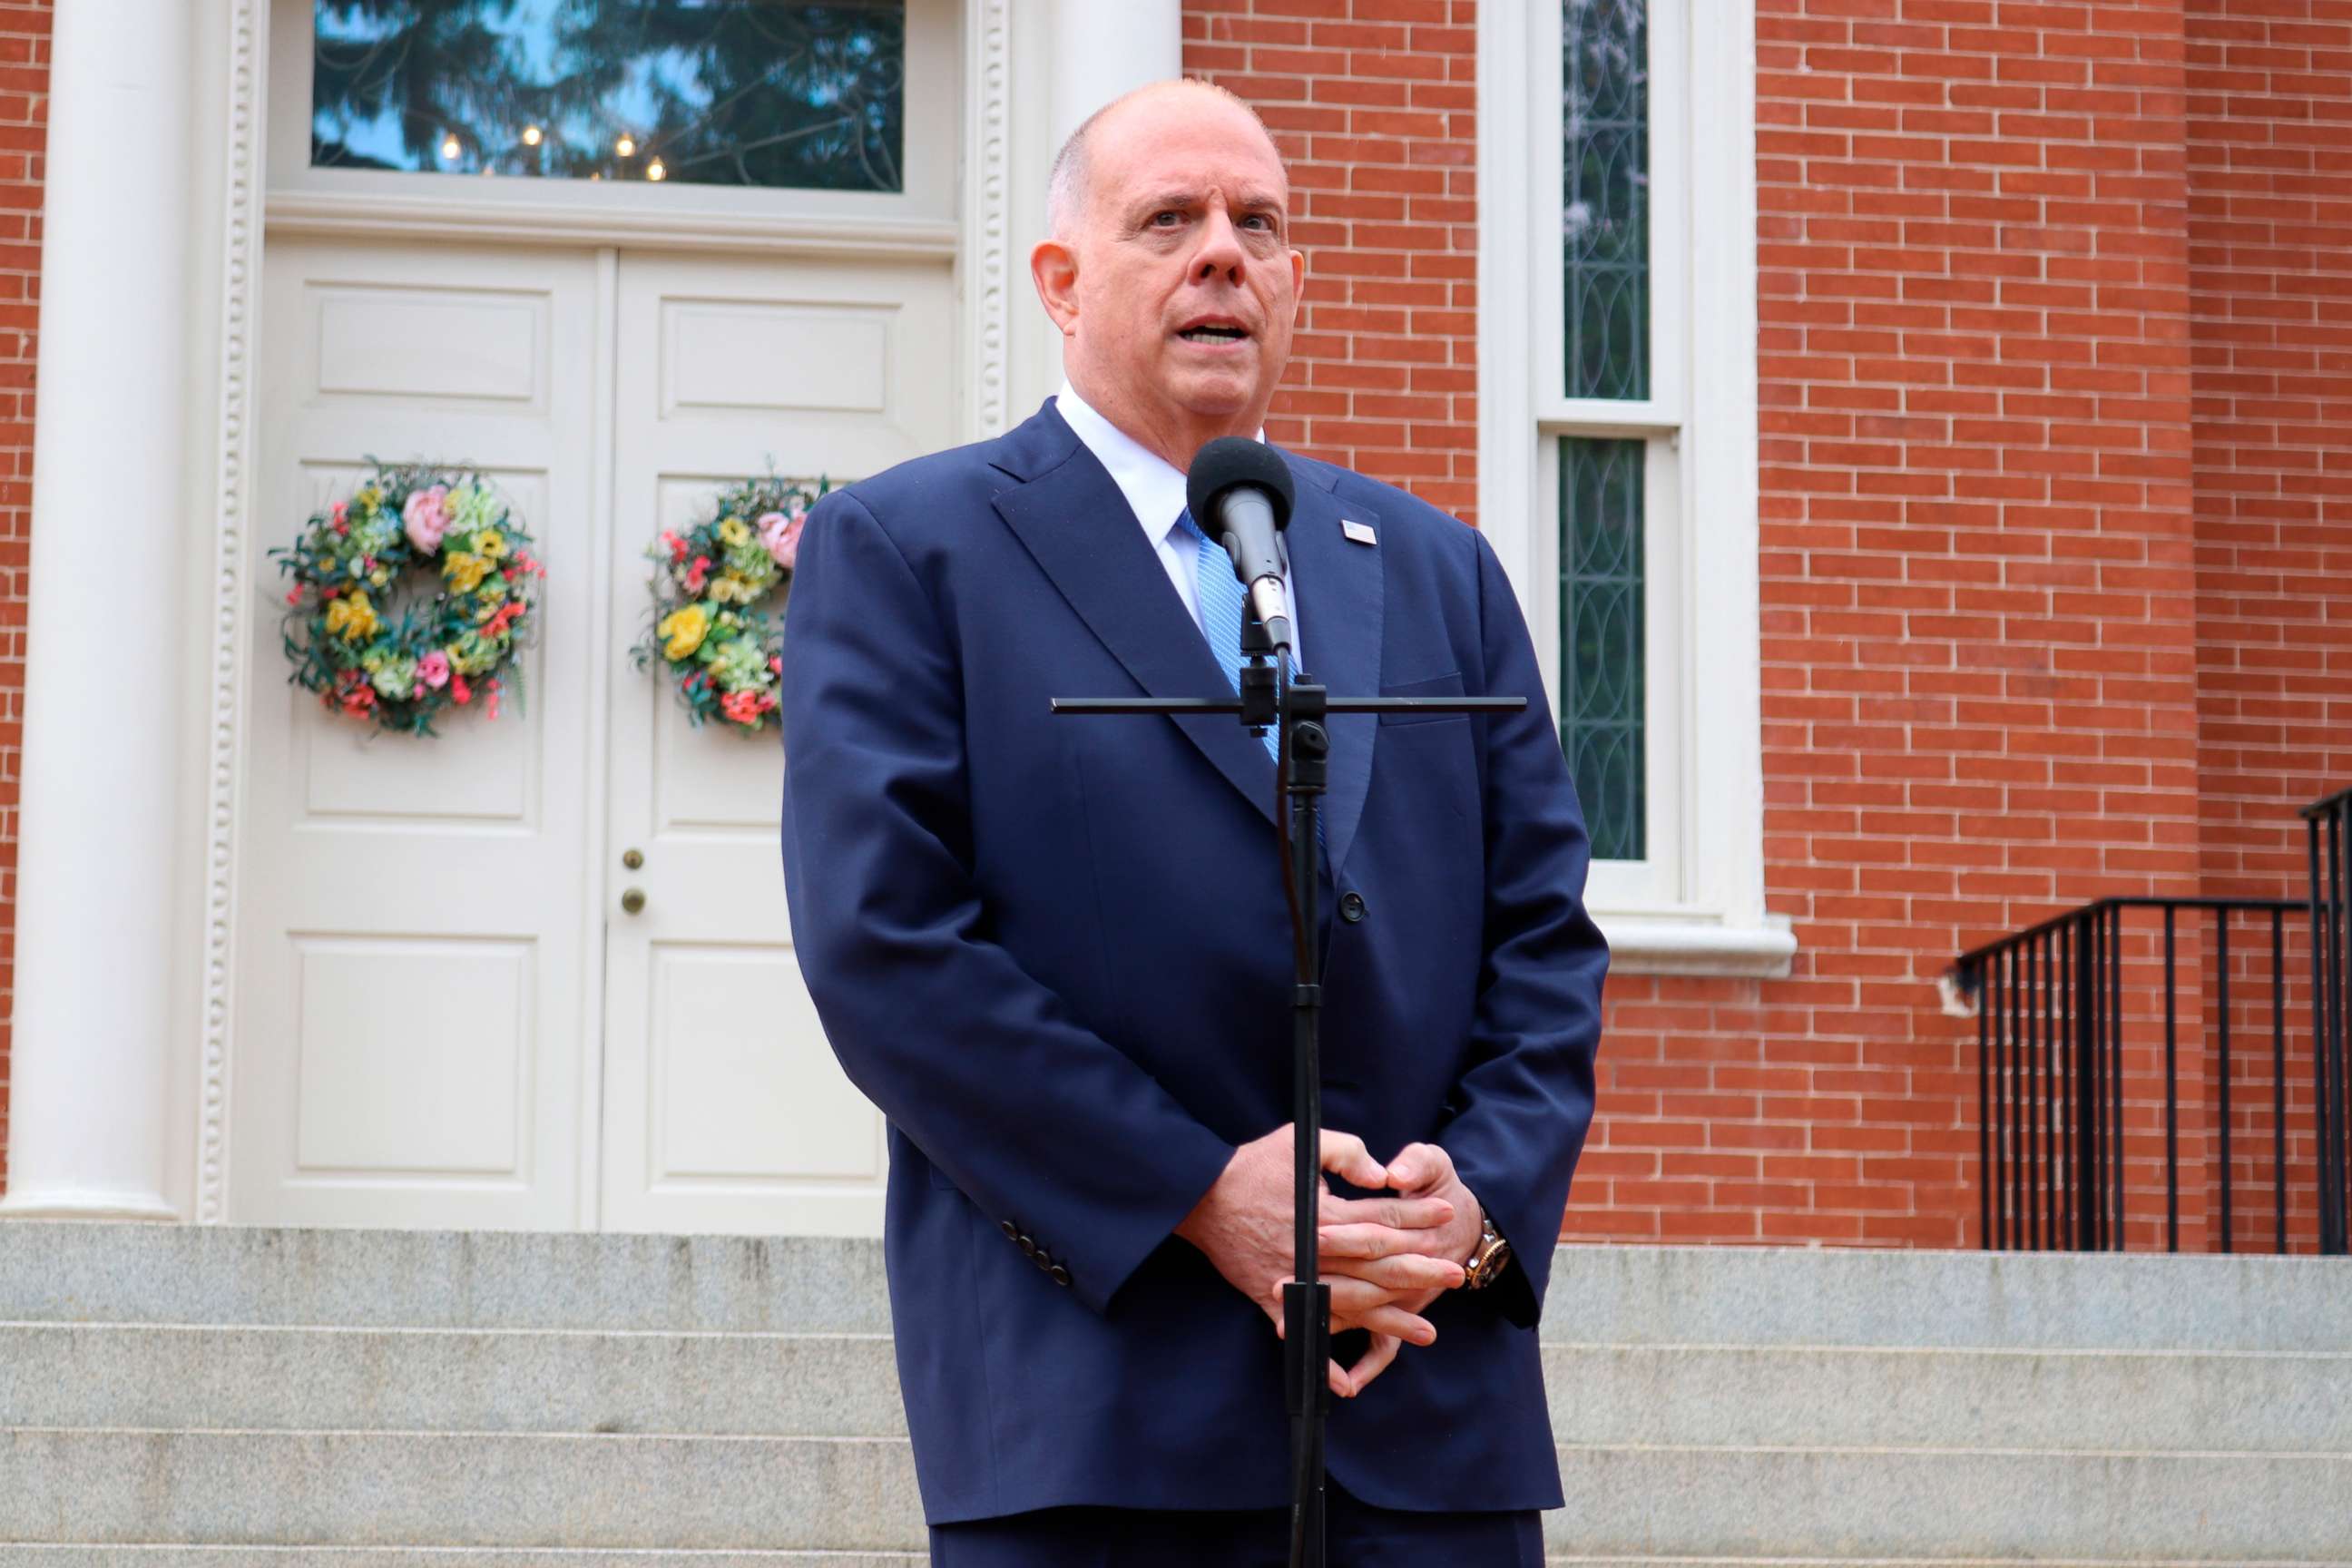 PHOTO: In this April 12, 2021 photo Maryland Gov. Larry Hogan talks to reporters at the governor's residence on the last day of the state's legislative session in Annapolis, Md.